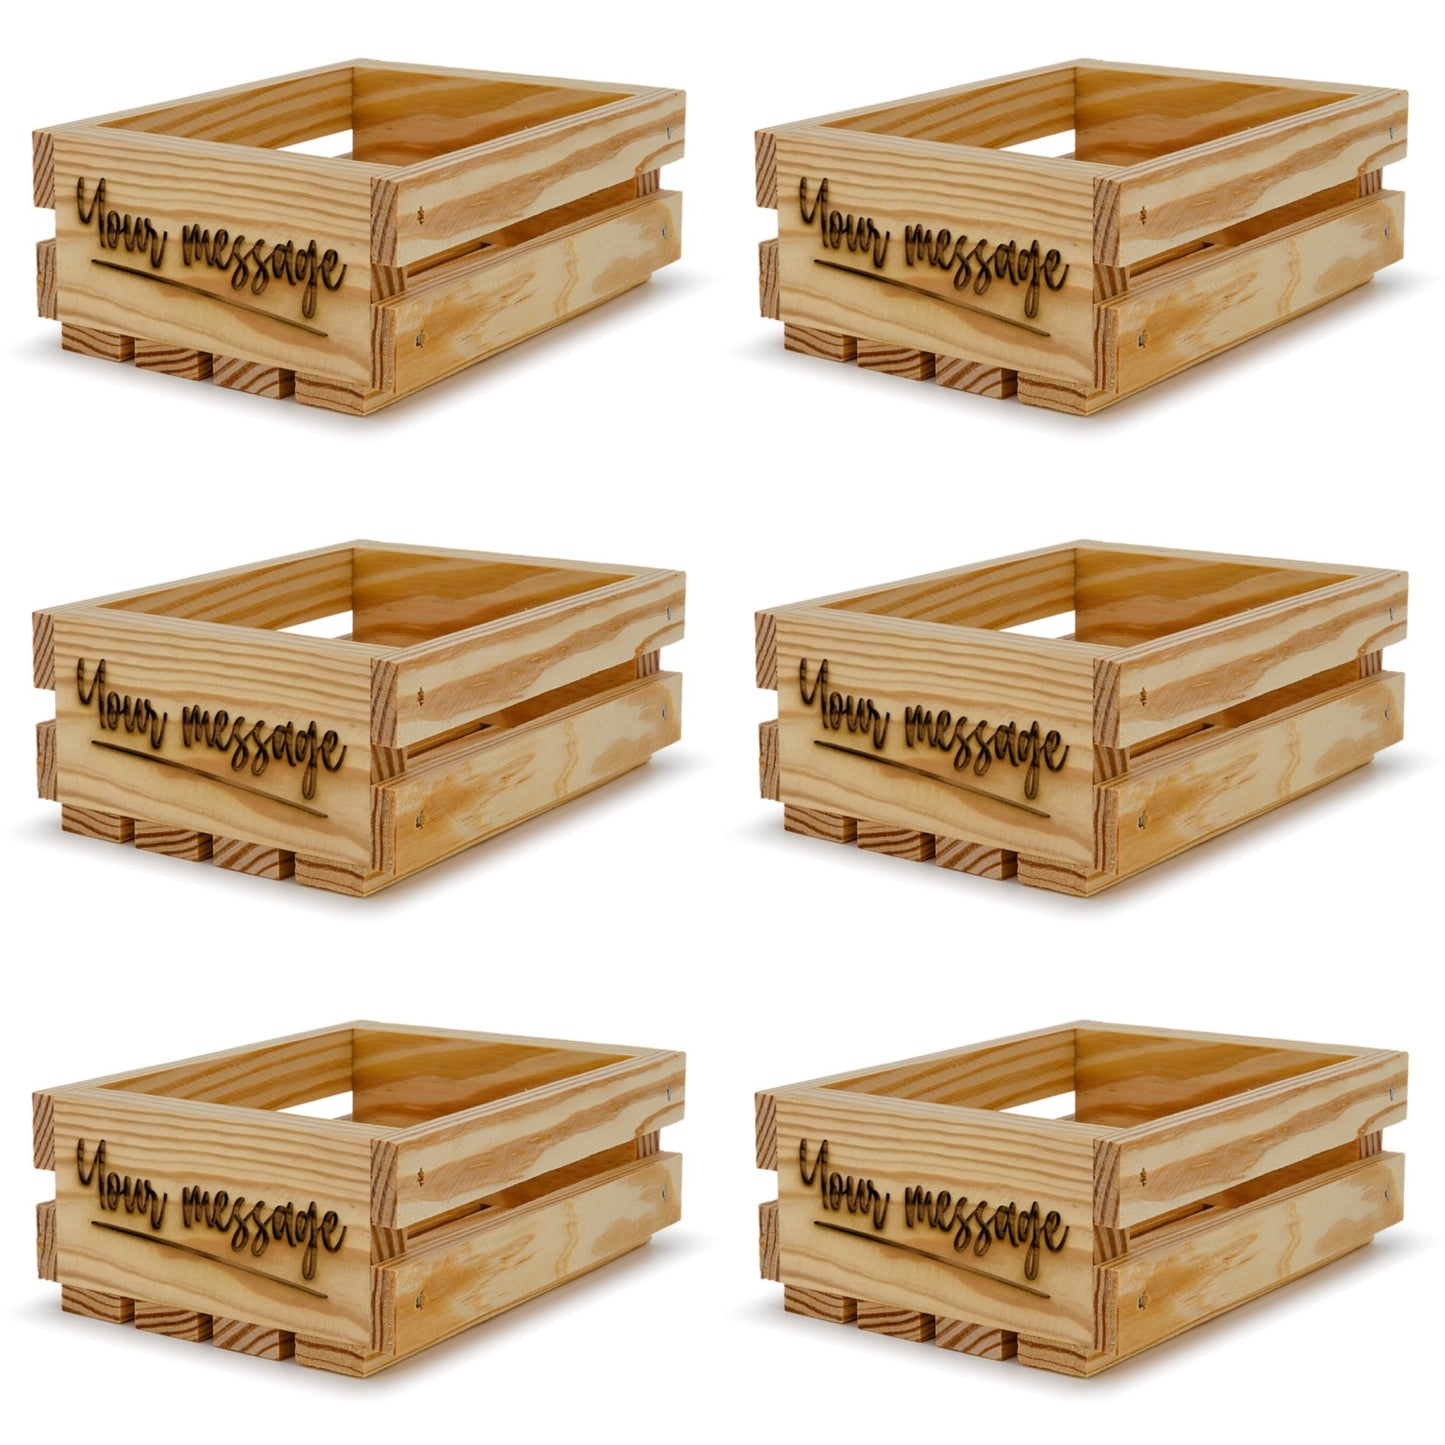 6 Small wooden crates 6x5x2.5 your message included